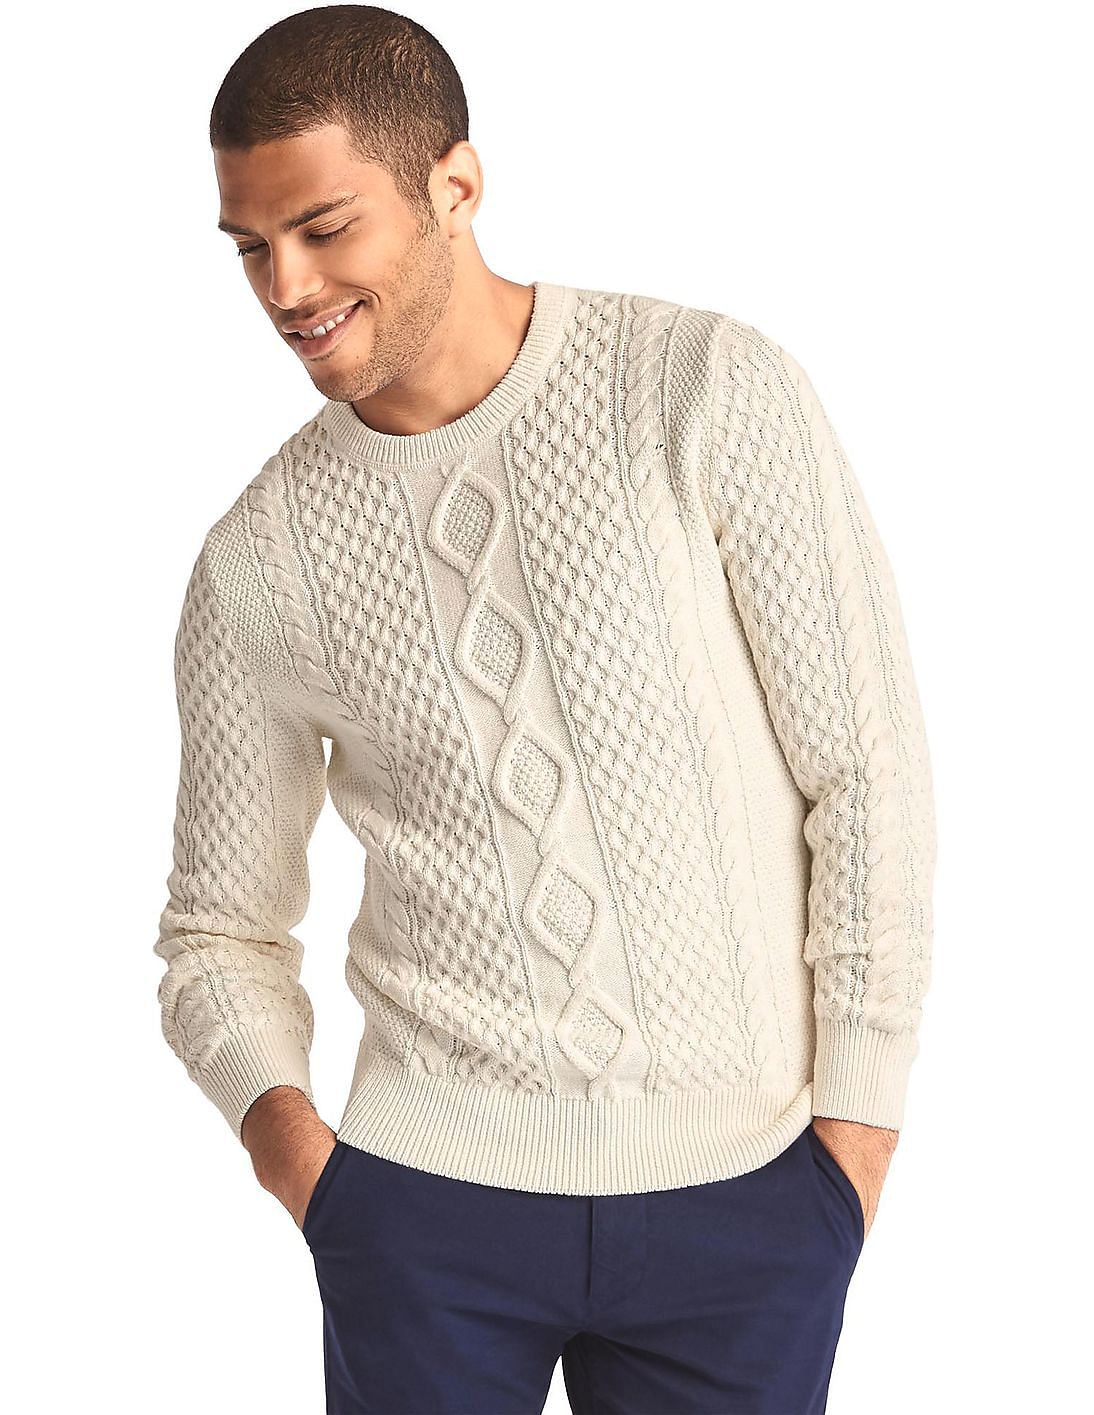 Buy GAP Men White Chunky Cable Knit Sweater - NNNOW.com